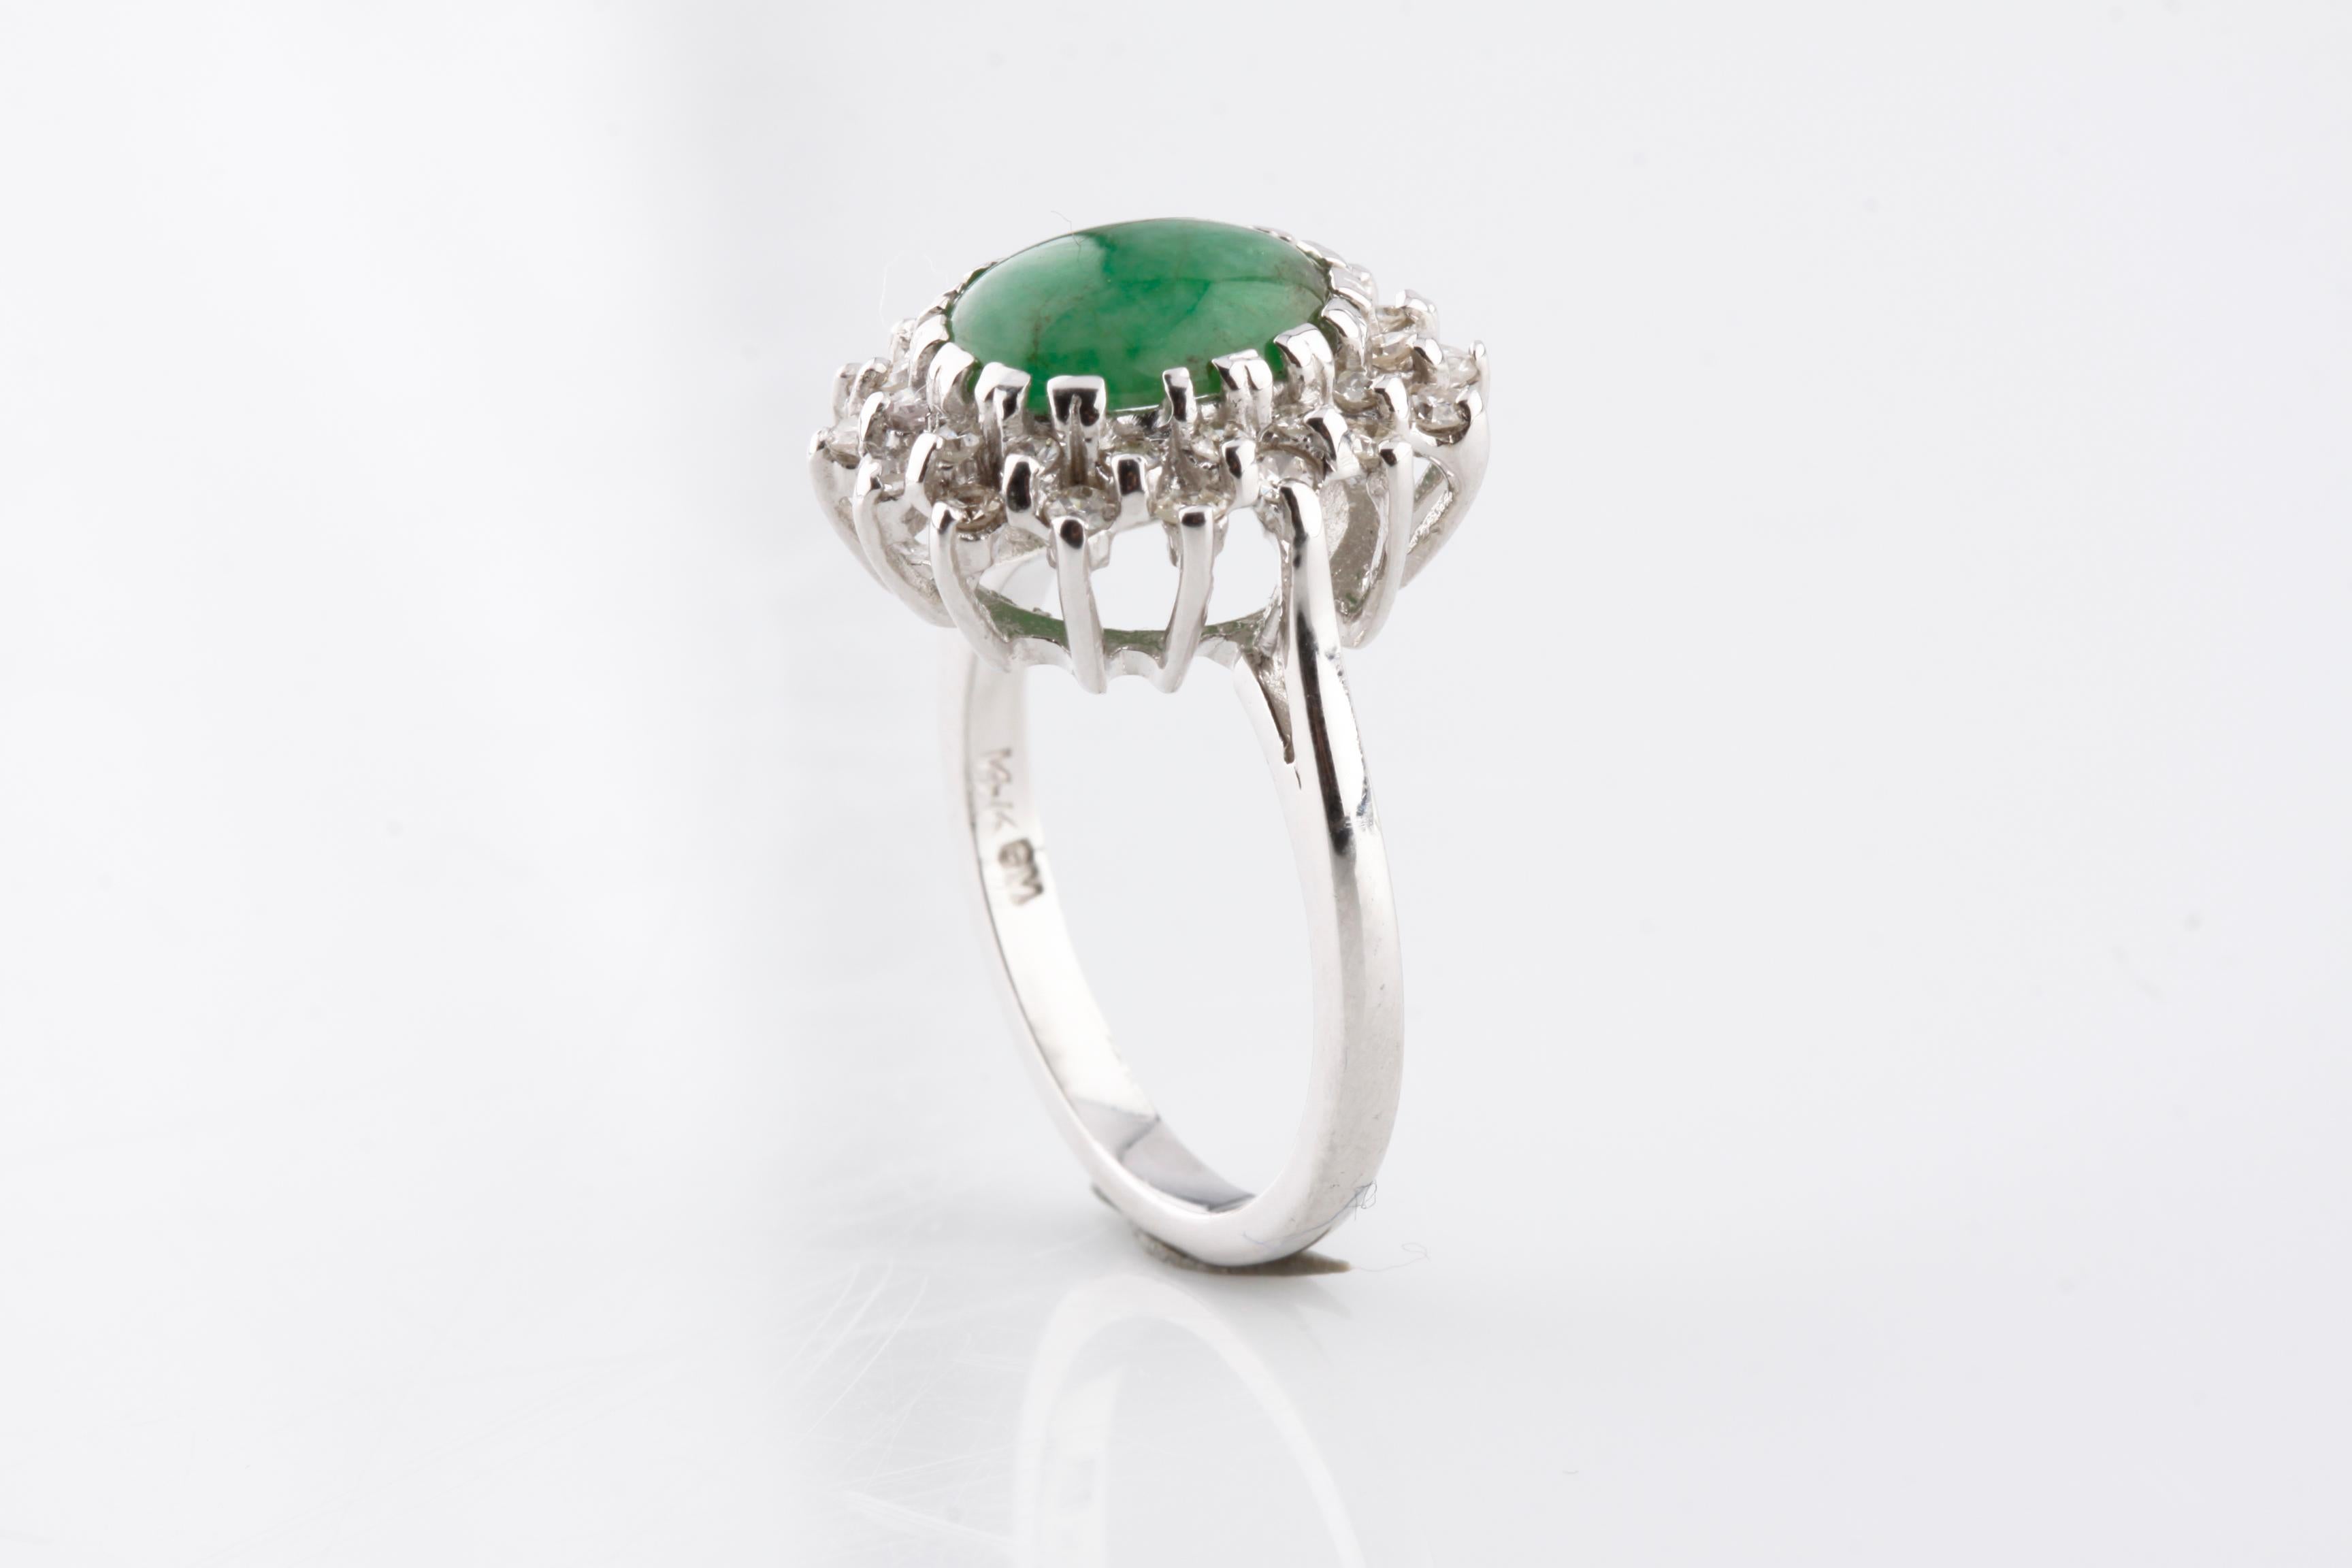 Cabochon 1.60 Carat Jadeite Solitaire Ring with Diamond Accents in White Gold For Sale